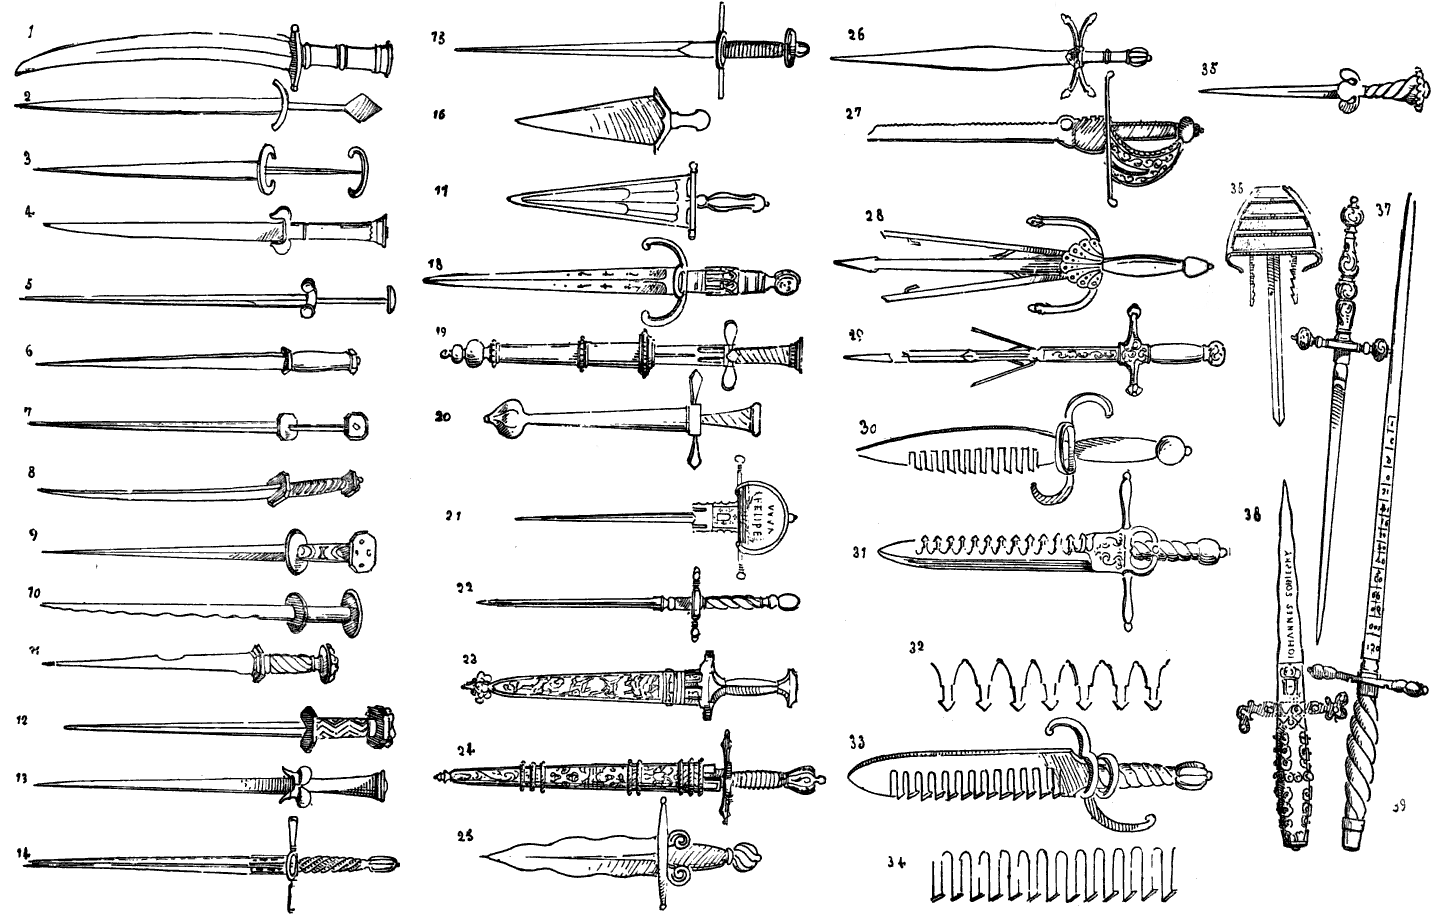 Daggers and Poniards of the Christian Middle Ages